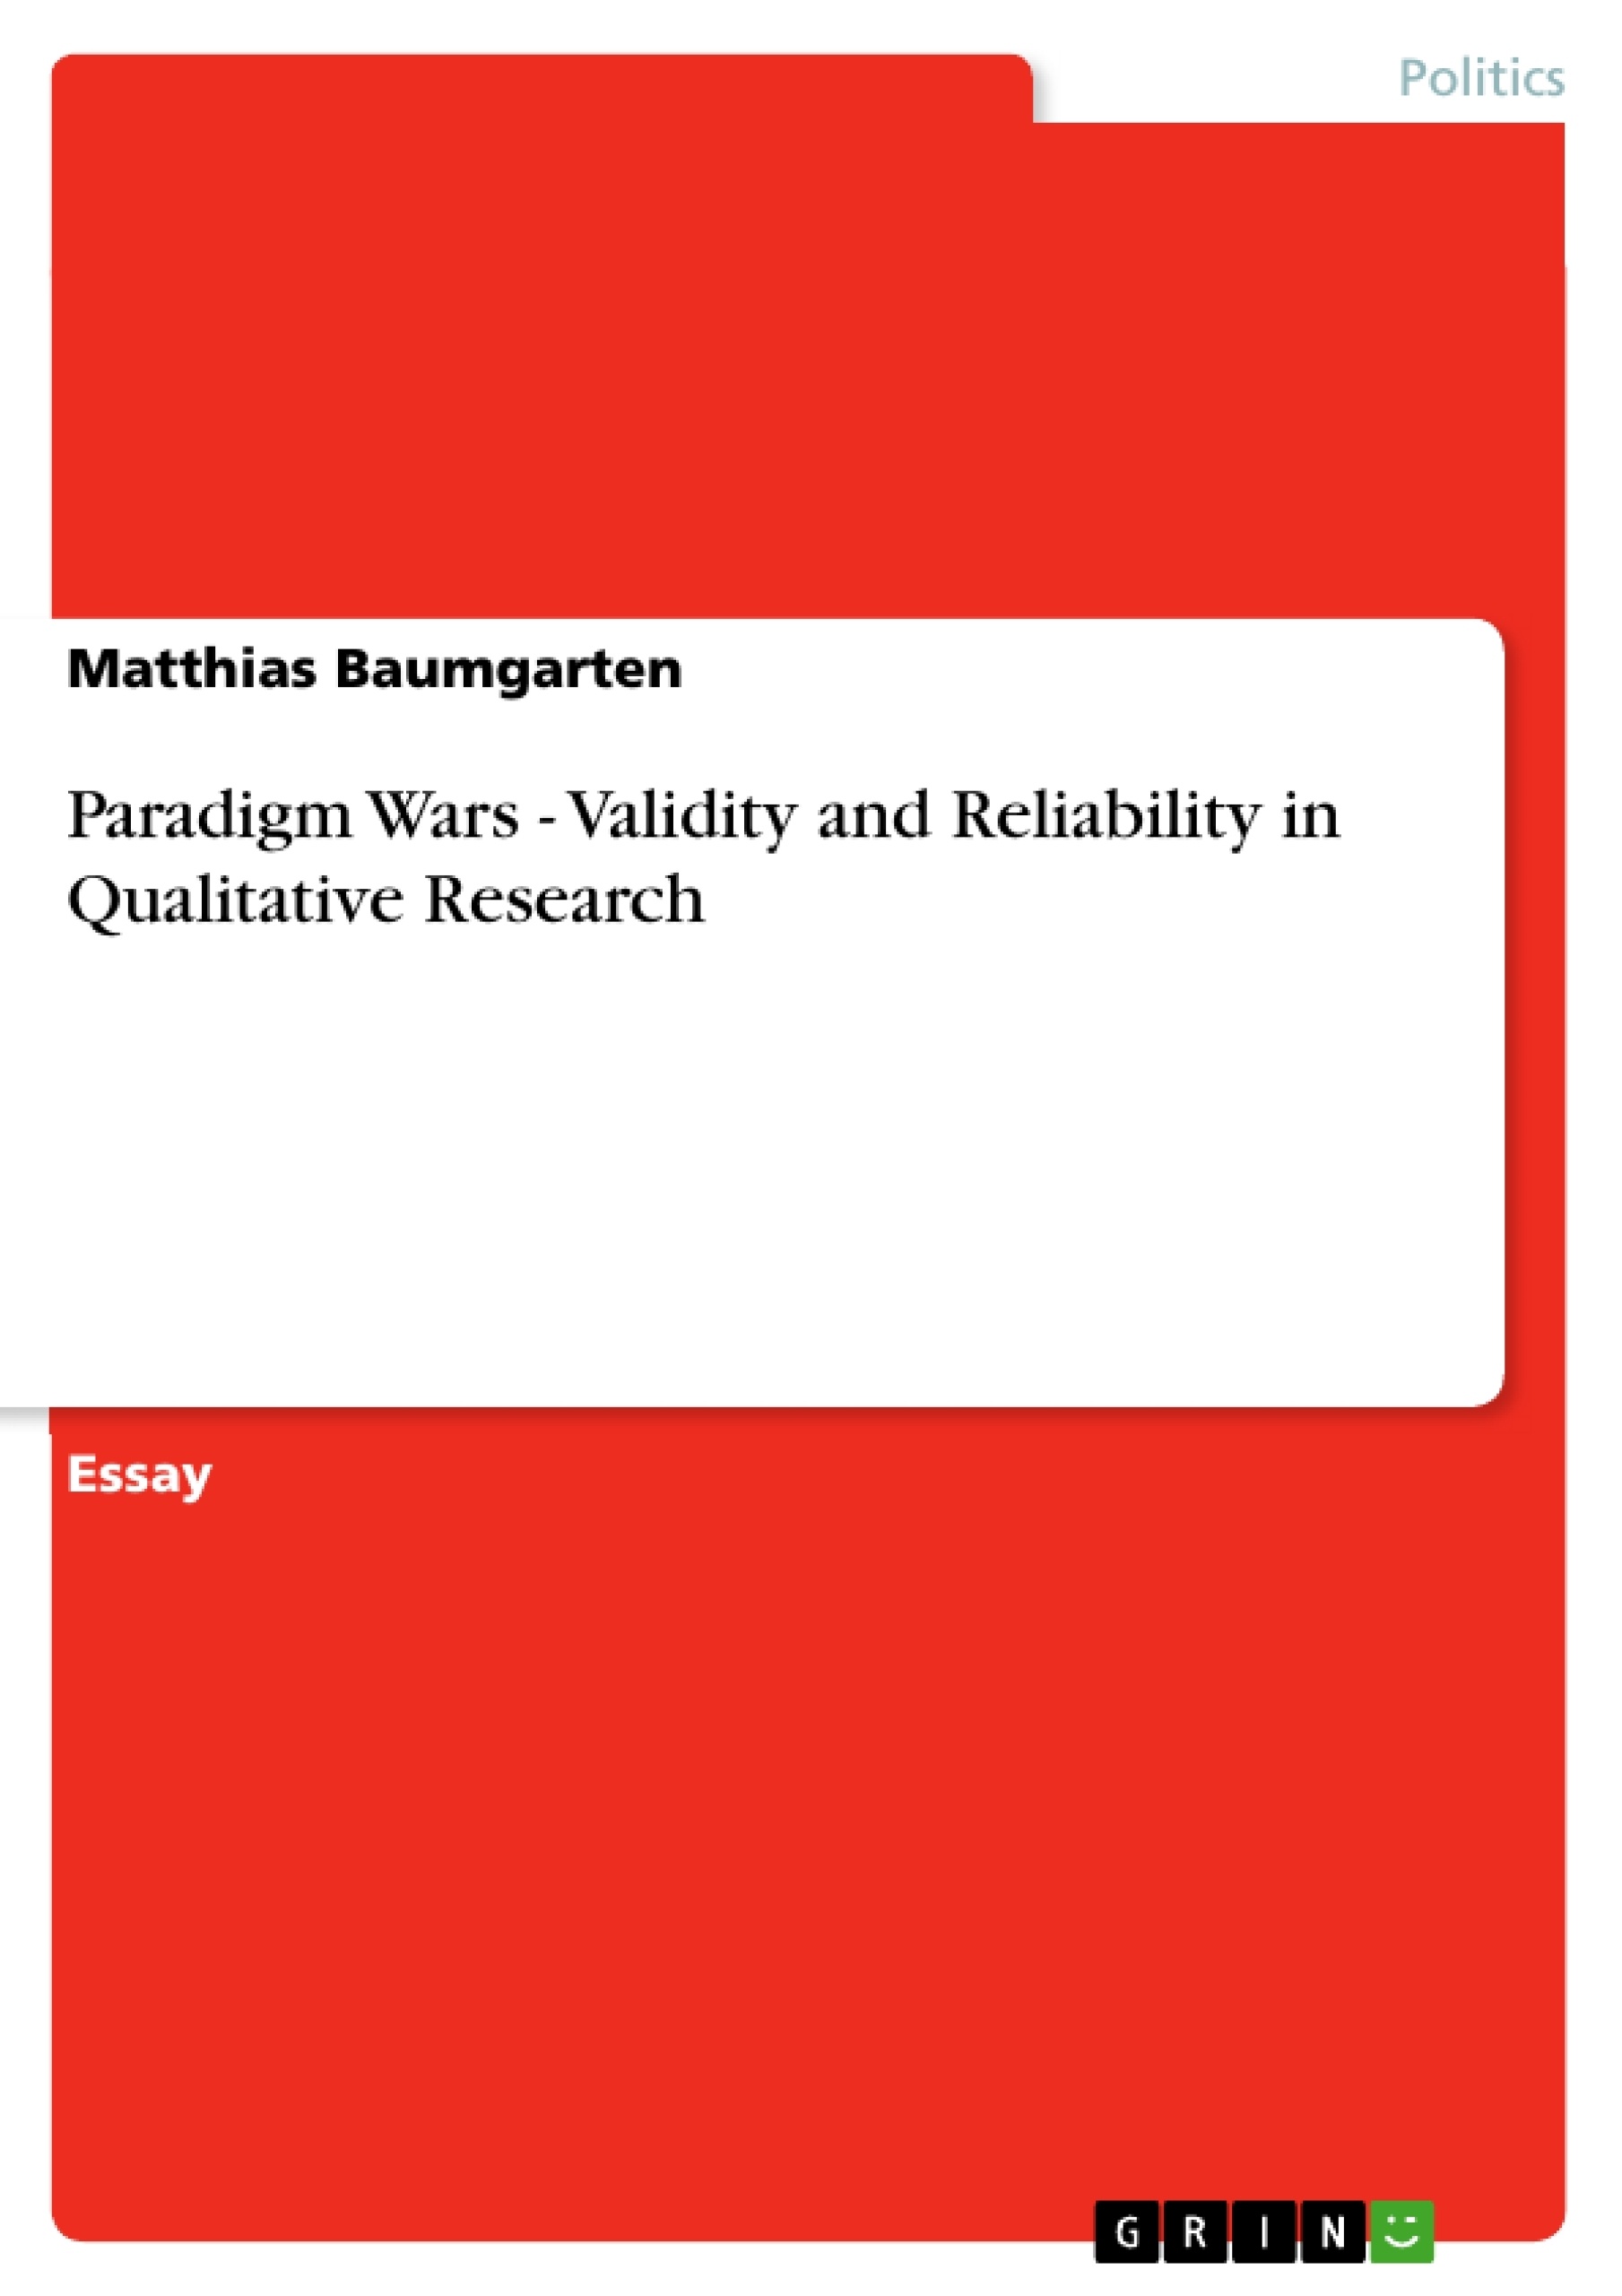 Title: Paradigm Wars - Validity and Reliability in Qualitative Research